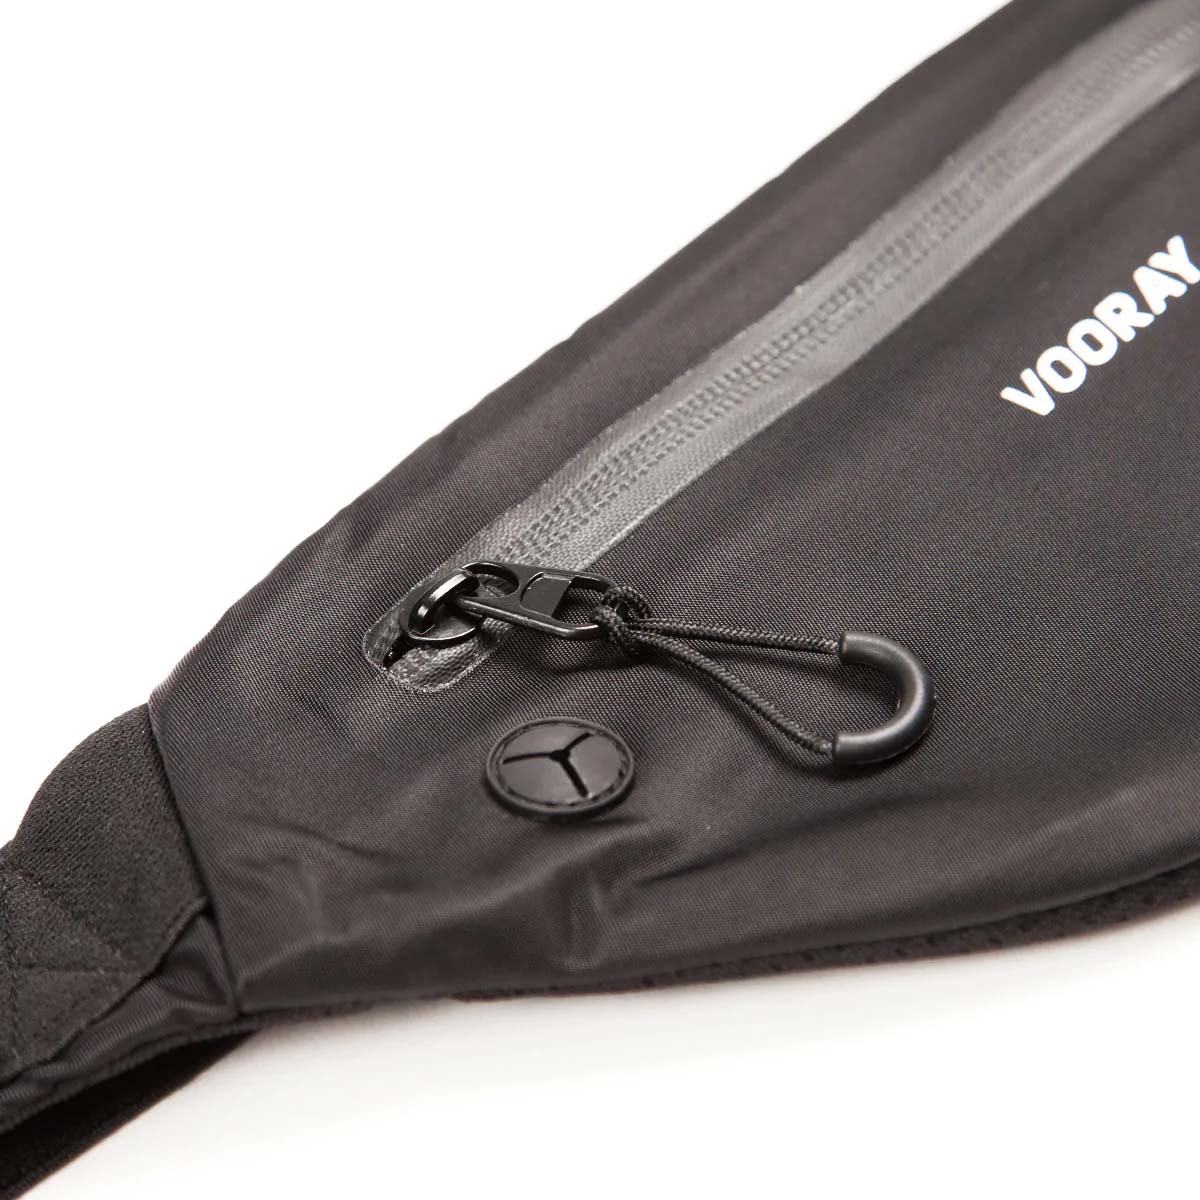 Vooray Active Fanny Pack, , large image number null